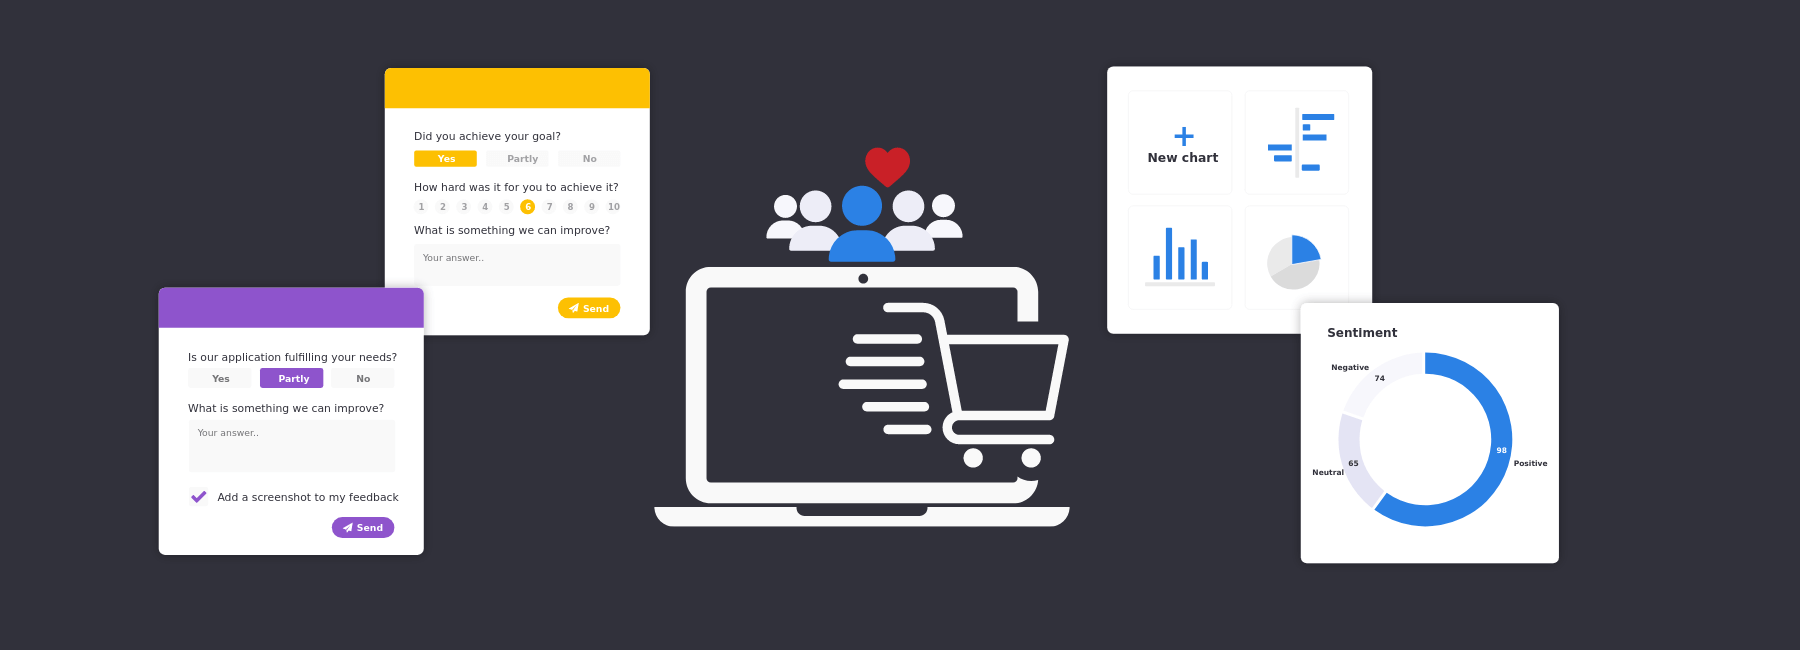 Best practices to improve the ecommerce customer experience with feedback